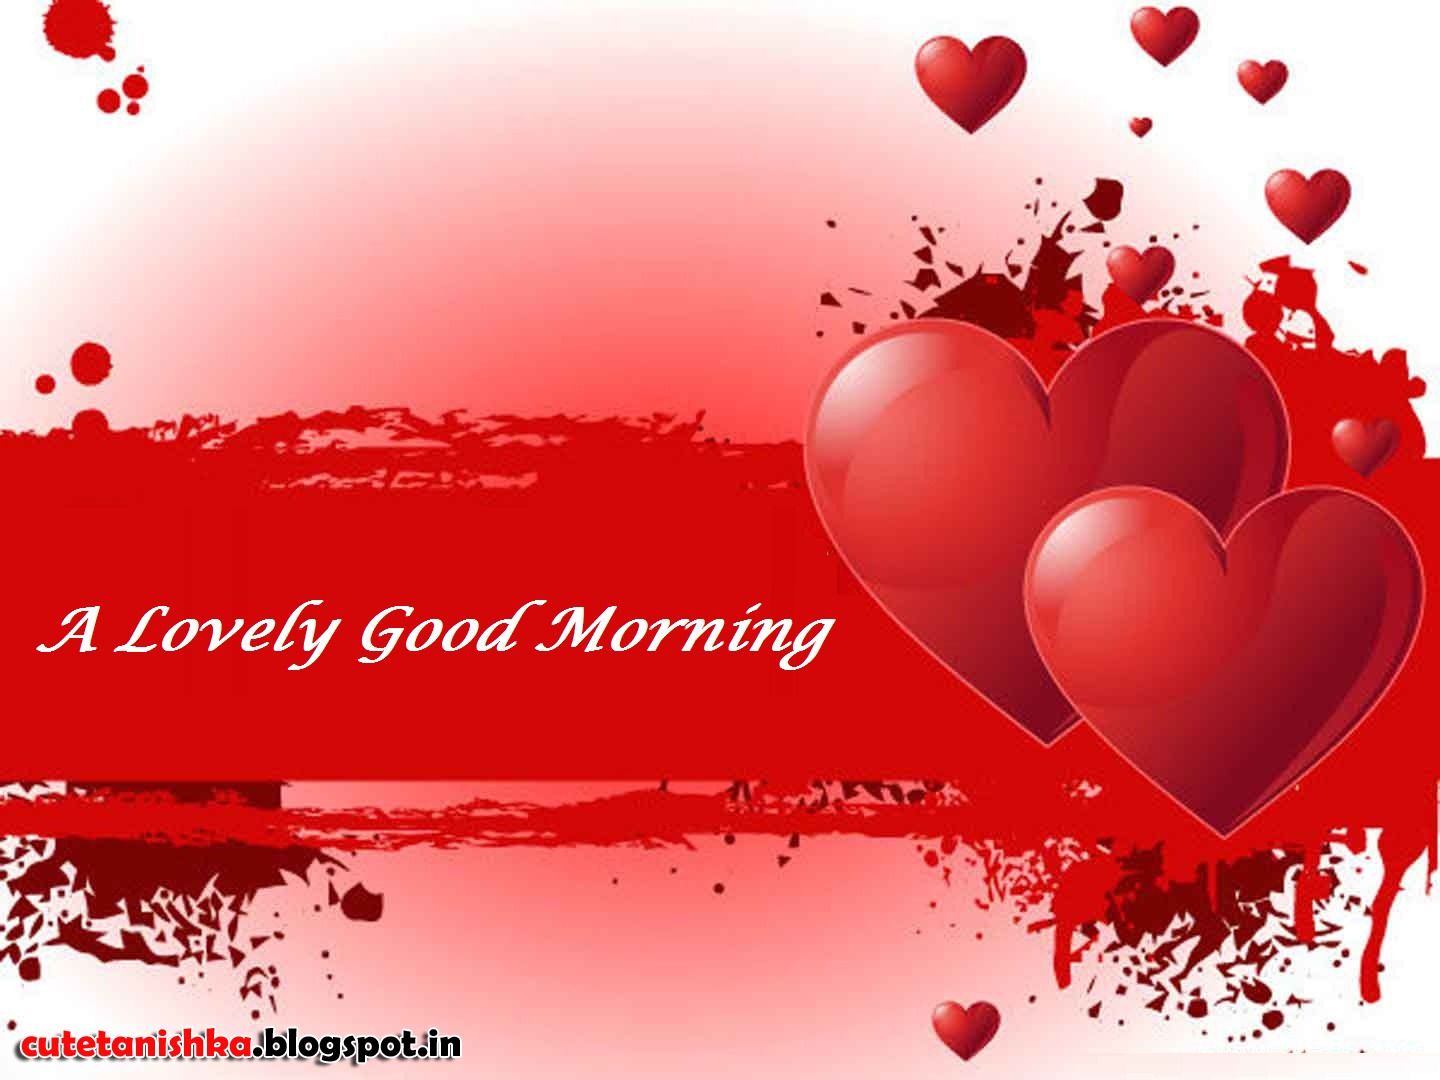 Lovely Good Morning Greetings Wallpaper Wishes Image